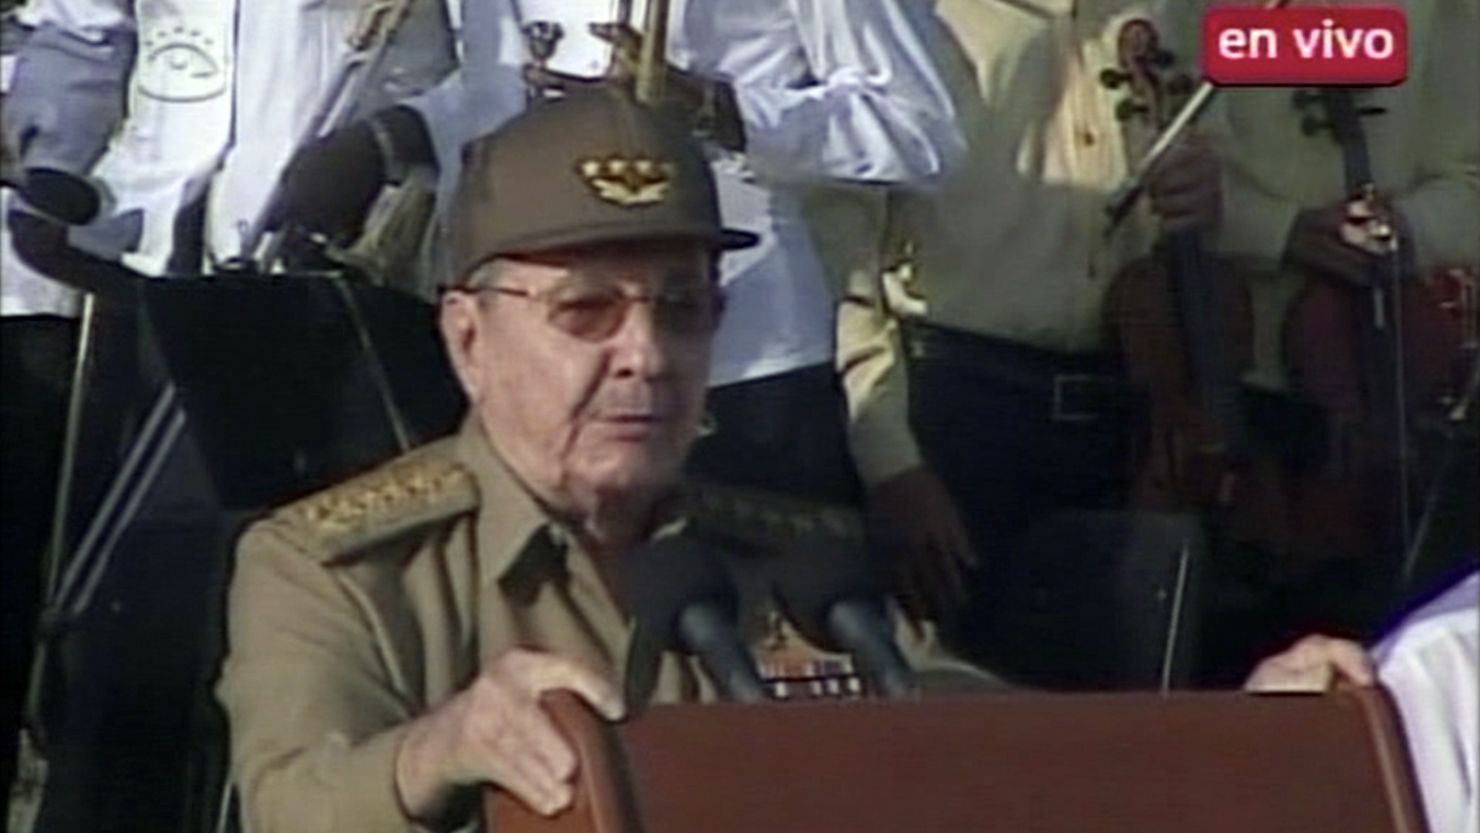 "If they want to discuss the problems of democracy ... we will discuss them," Cuban President Raul Castro said Thursday.